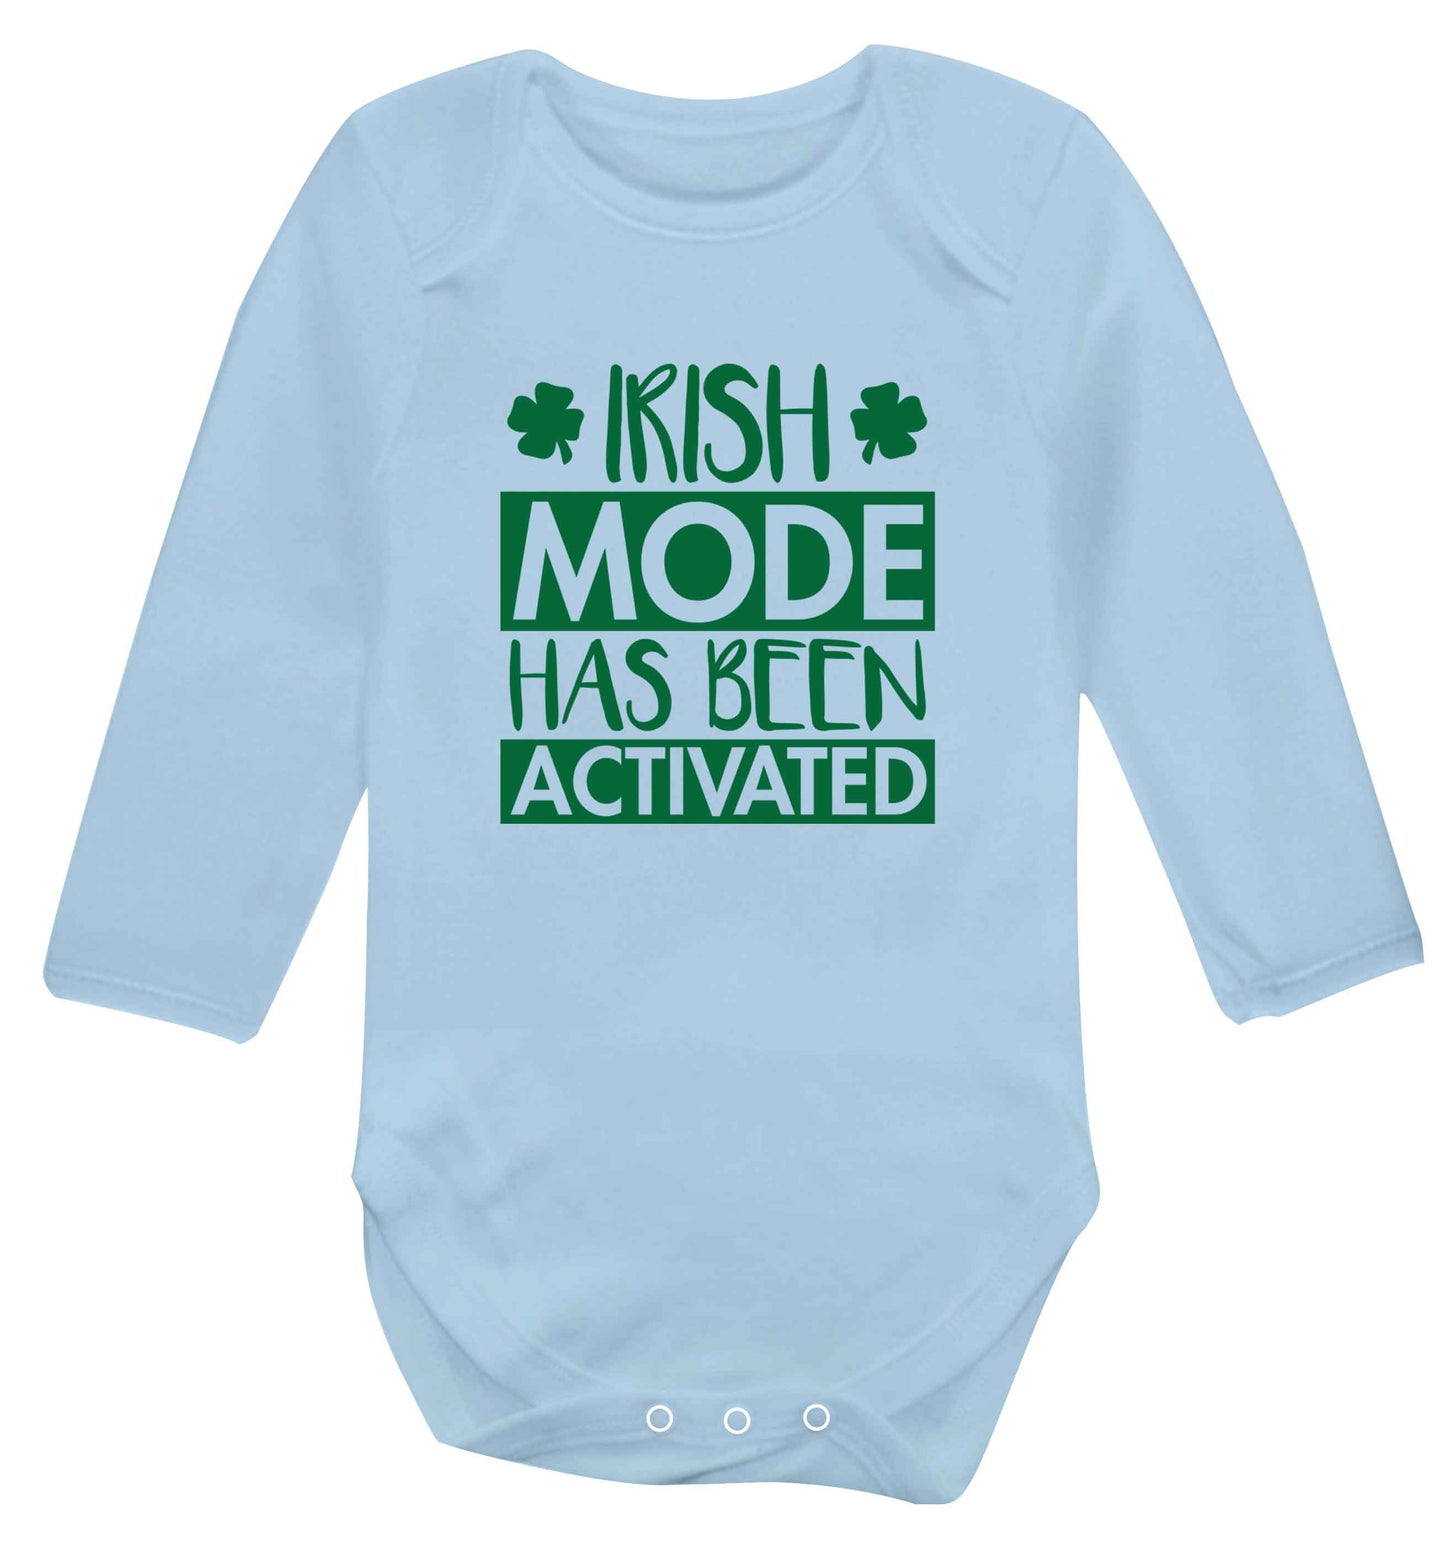 Irish mode has been activated baby vest long sleeved pale blue 6-12 months